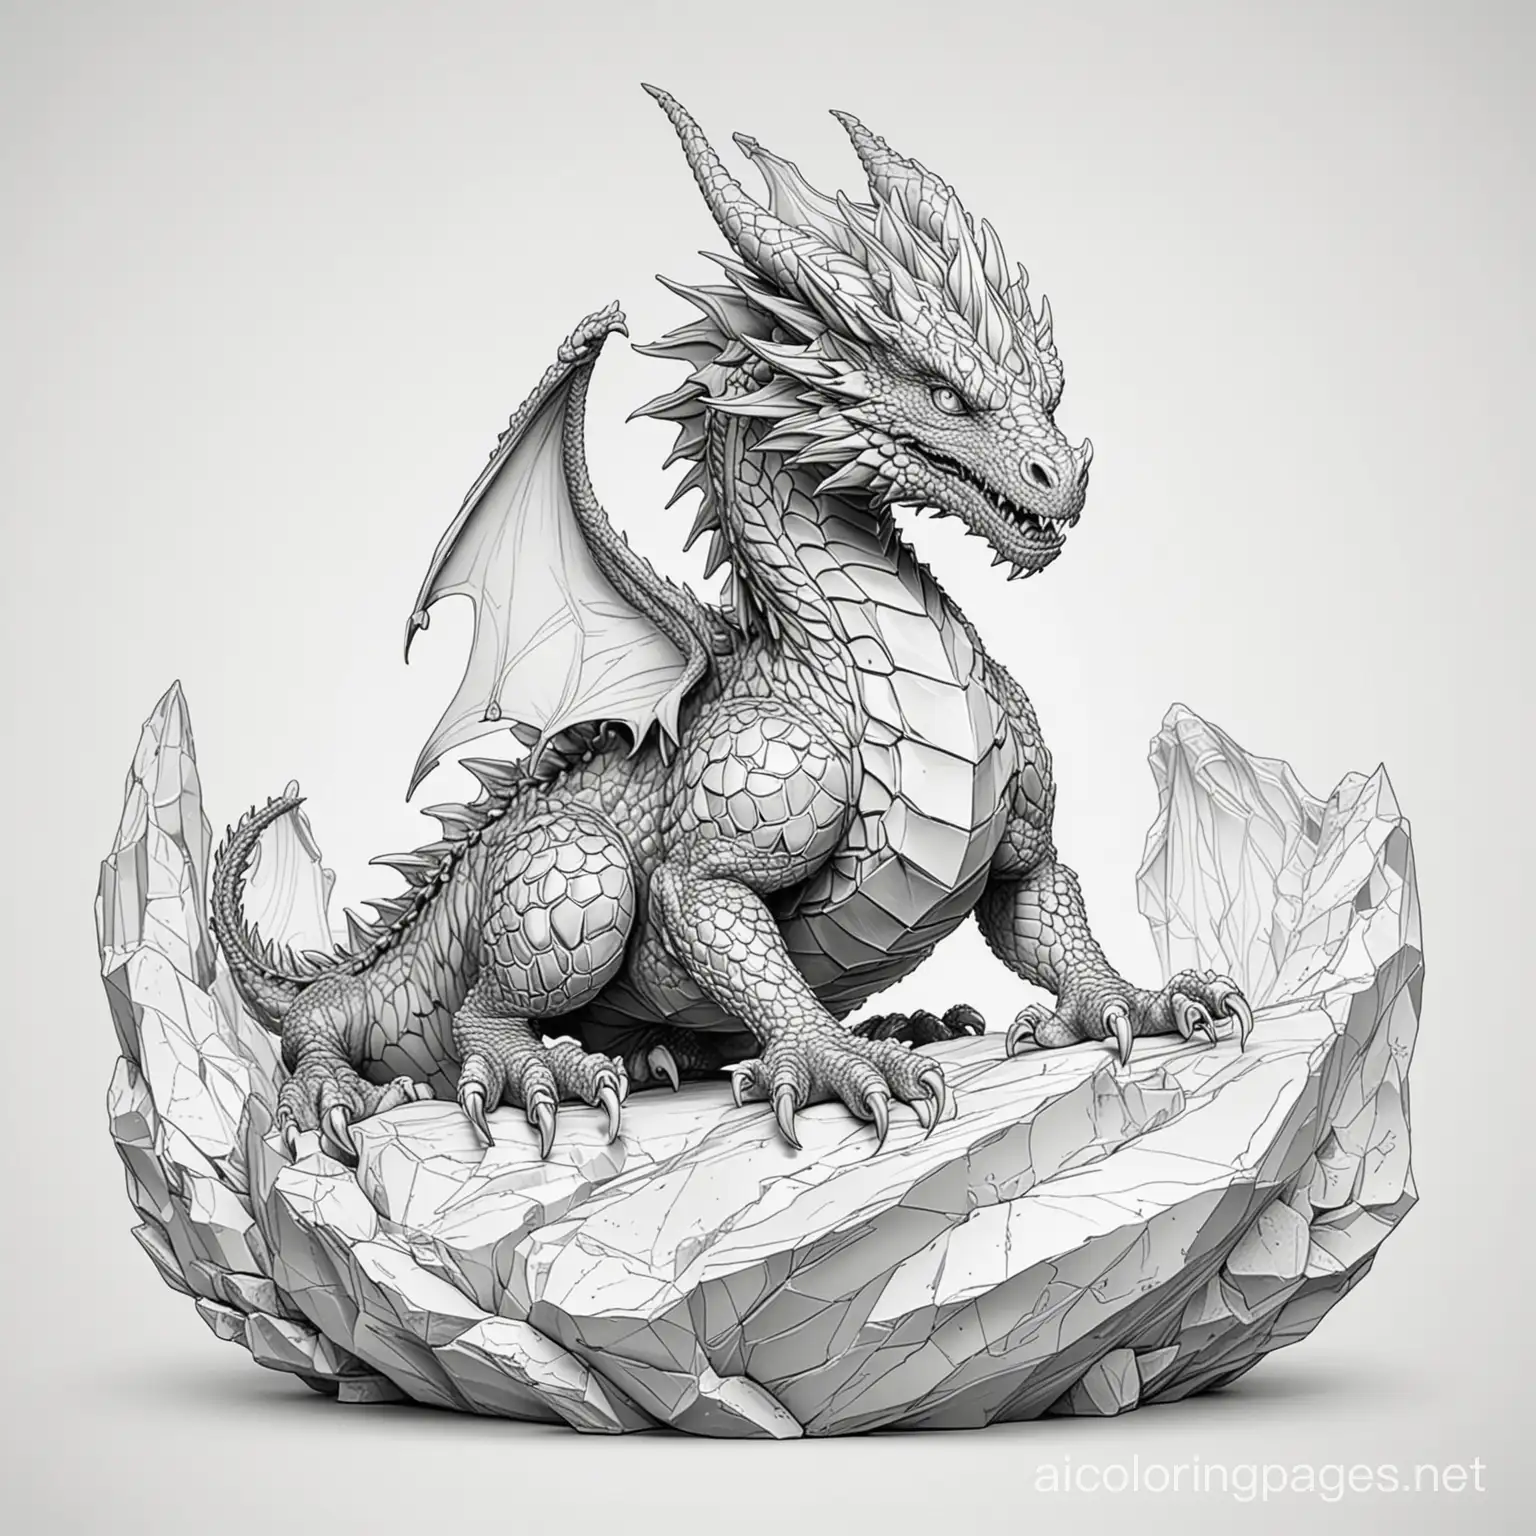 Crystal-Rock-Dragon-Coloring-Page-Simplistic-Line-Art-on-White-Background